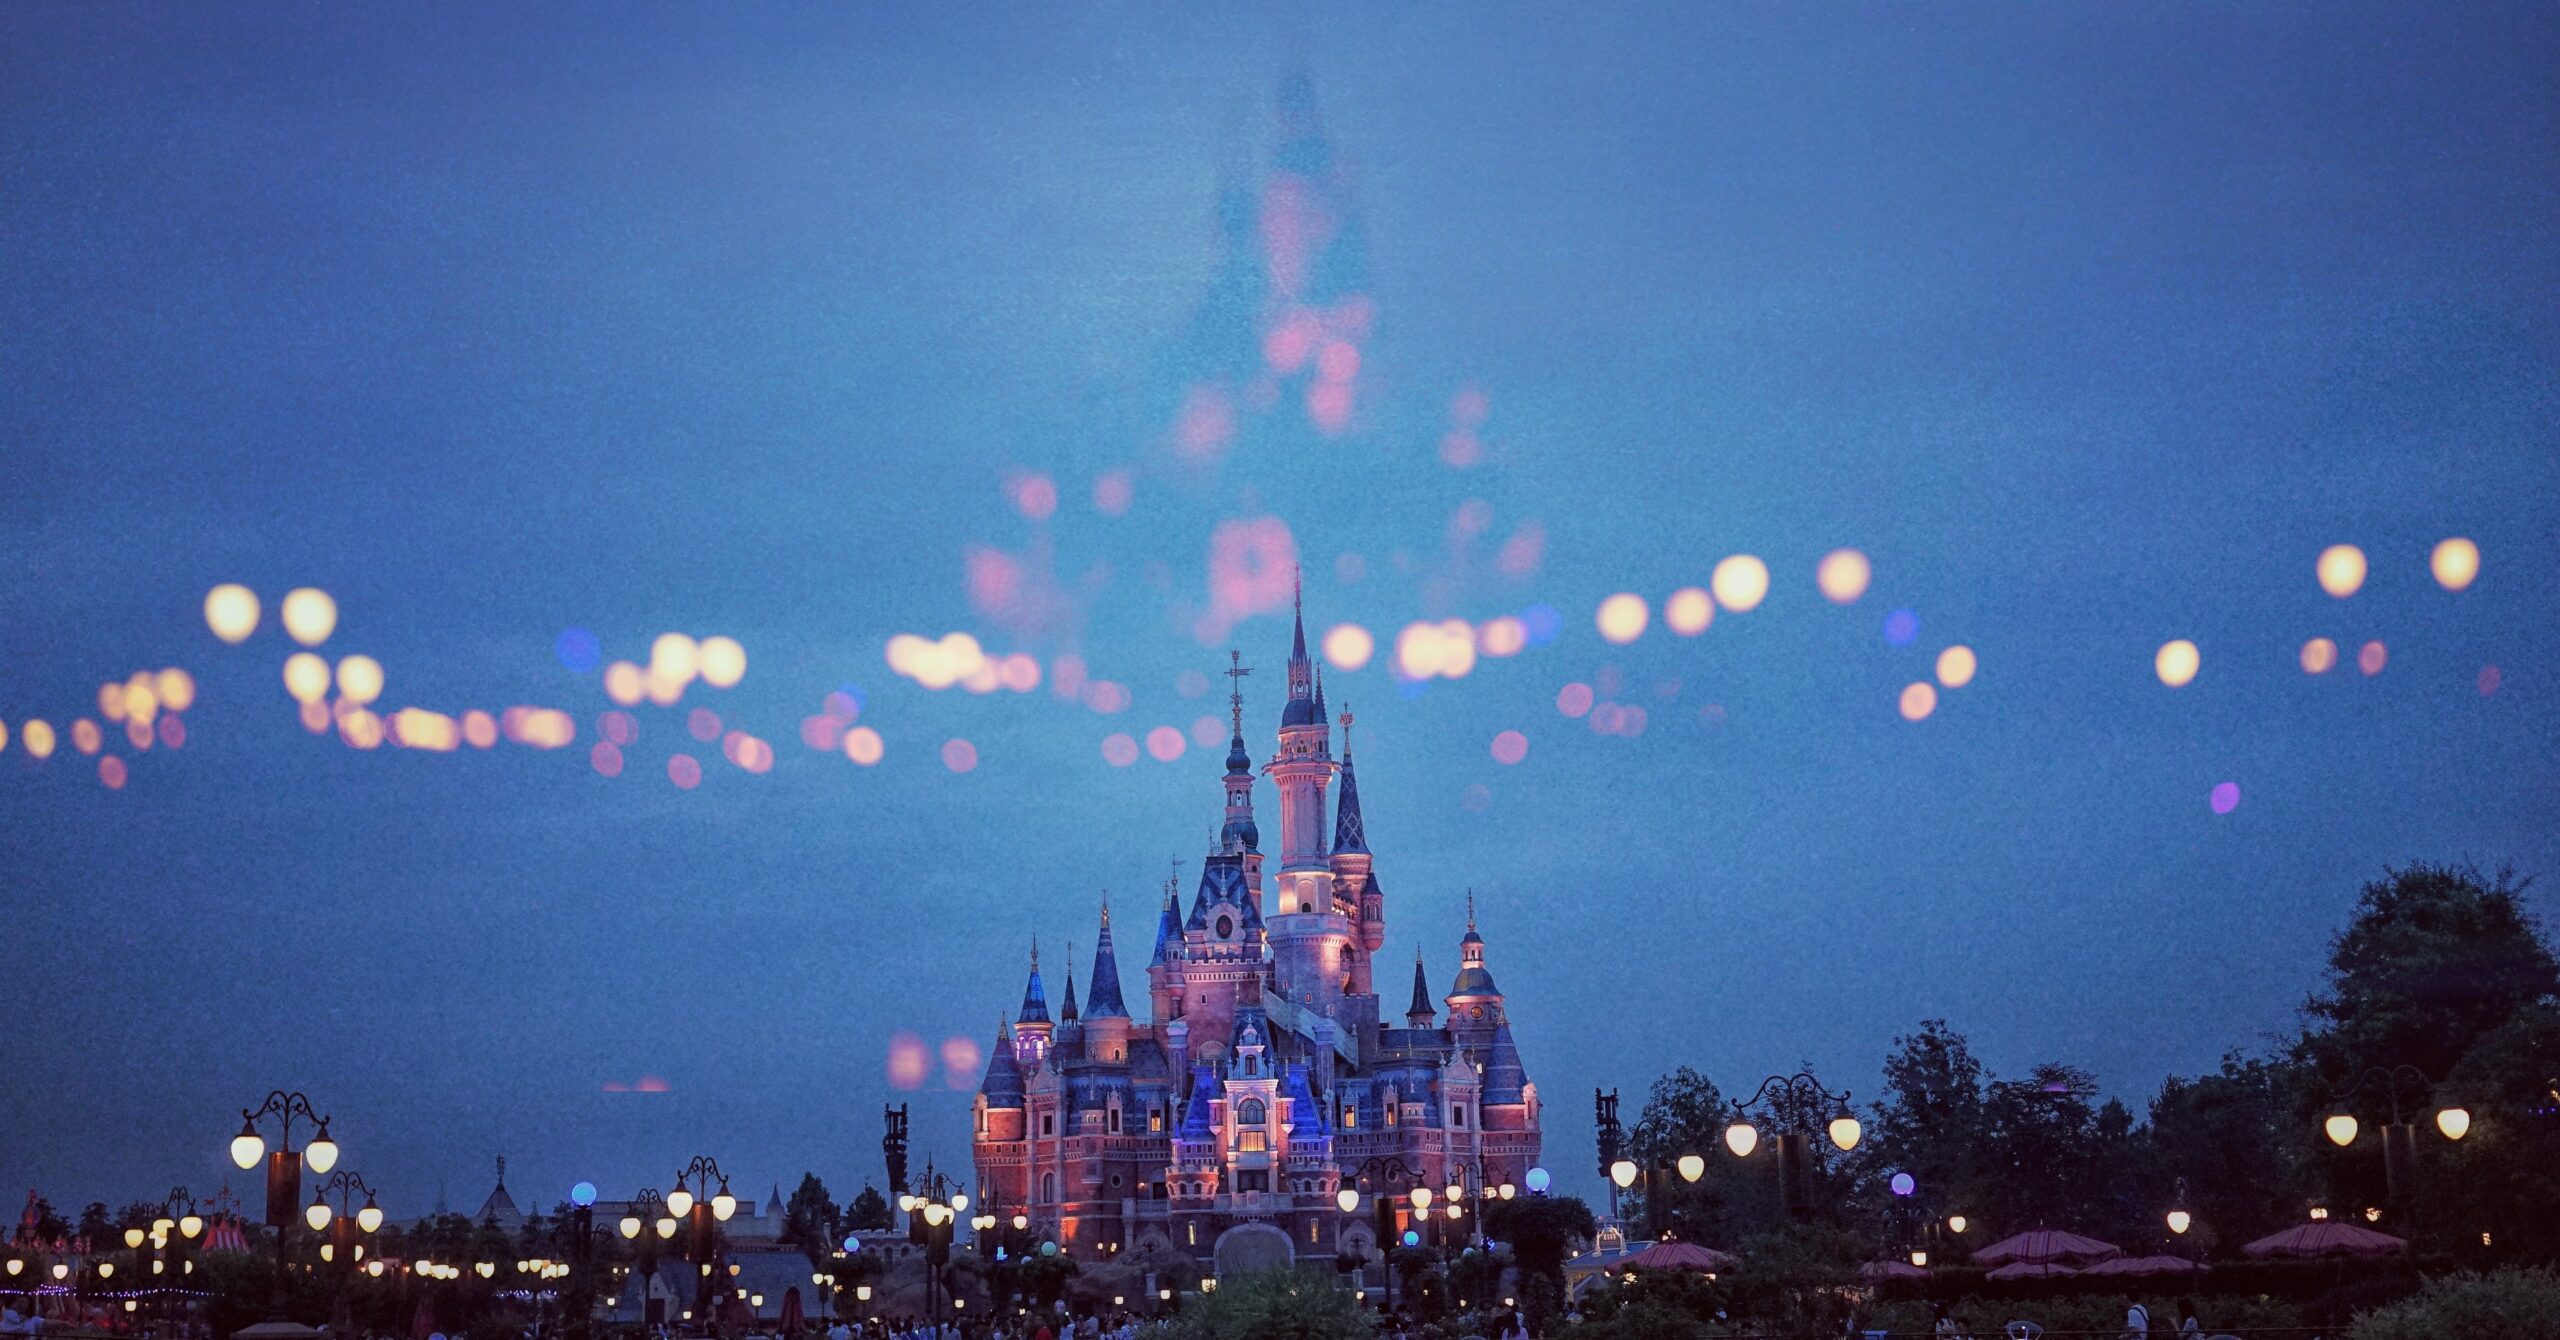 Image of the Disney castle at night. Dark blue sky and out of focus lights.